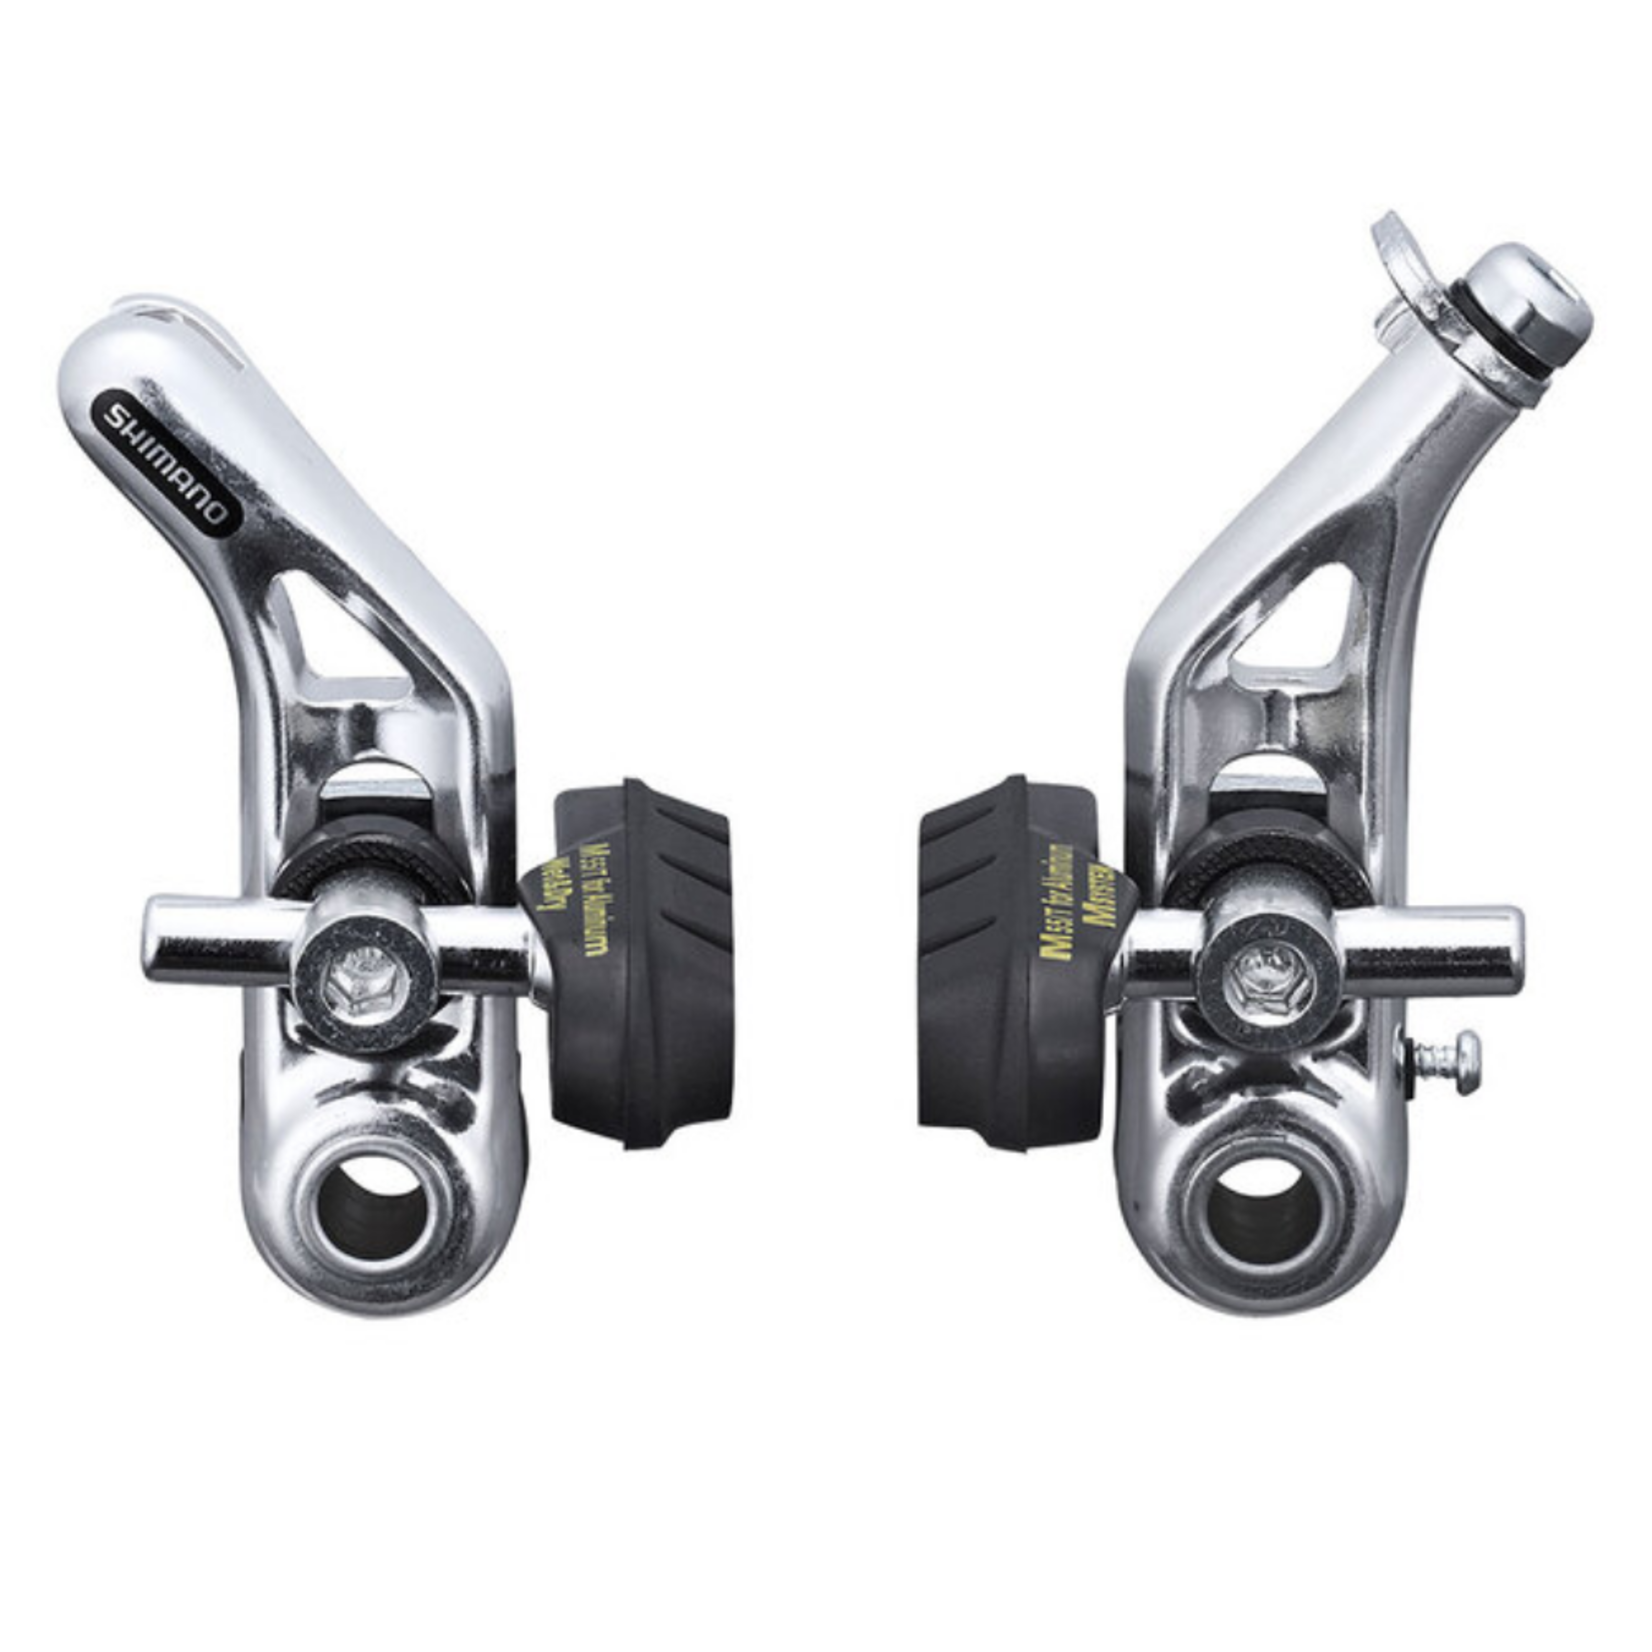 Shimano CANTILEVER BRAKE, SHIMANO ALTUS C90BR-CT91 FRONT M-SIZE 13.5MM FIXING BOLTSW/Z-TYPE A/73 LINK WIRE